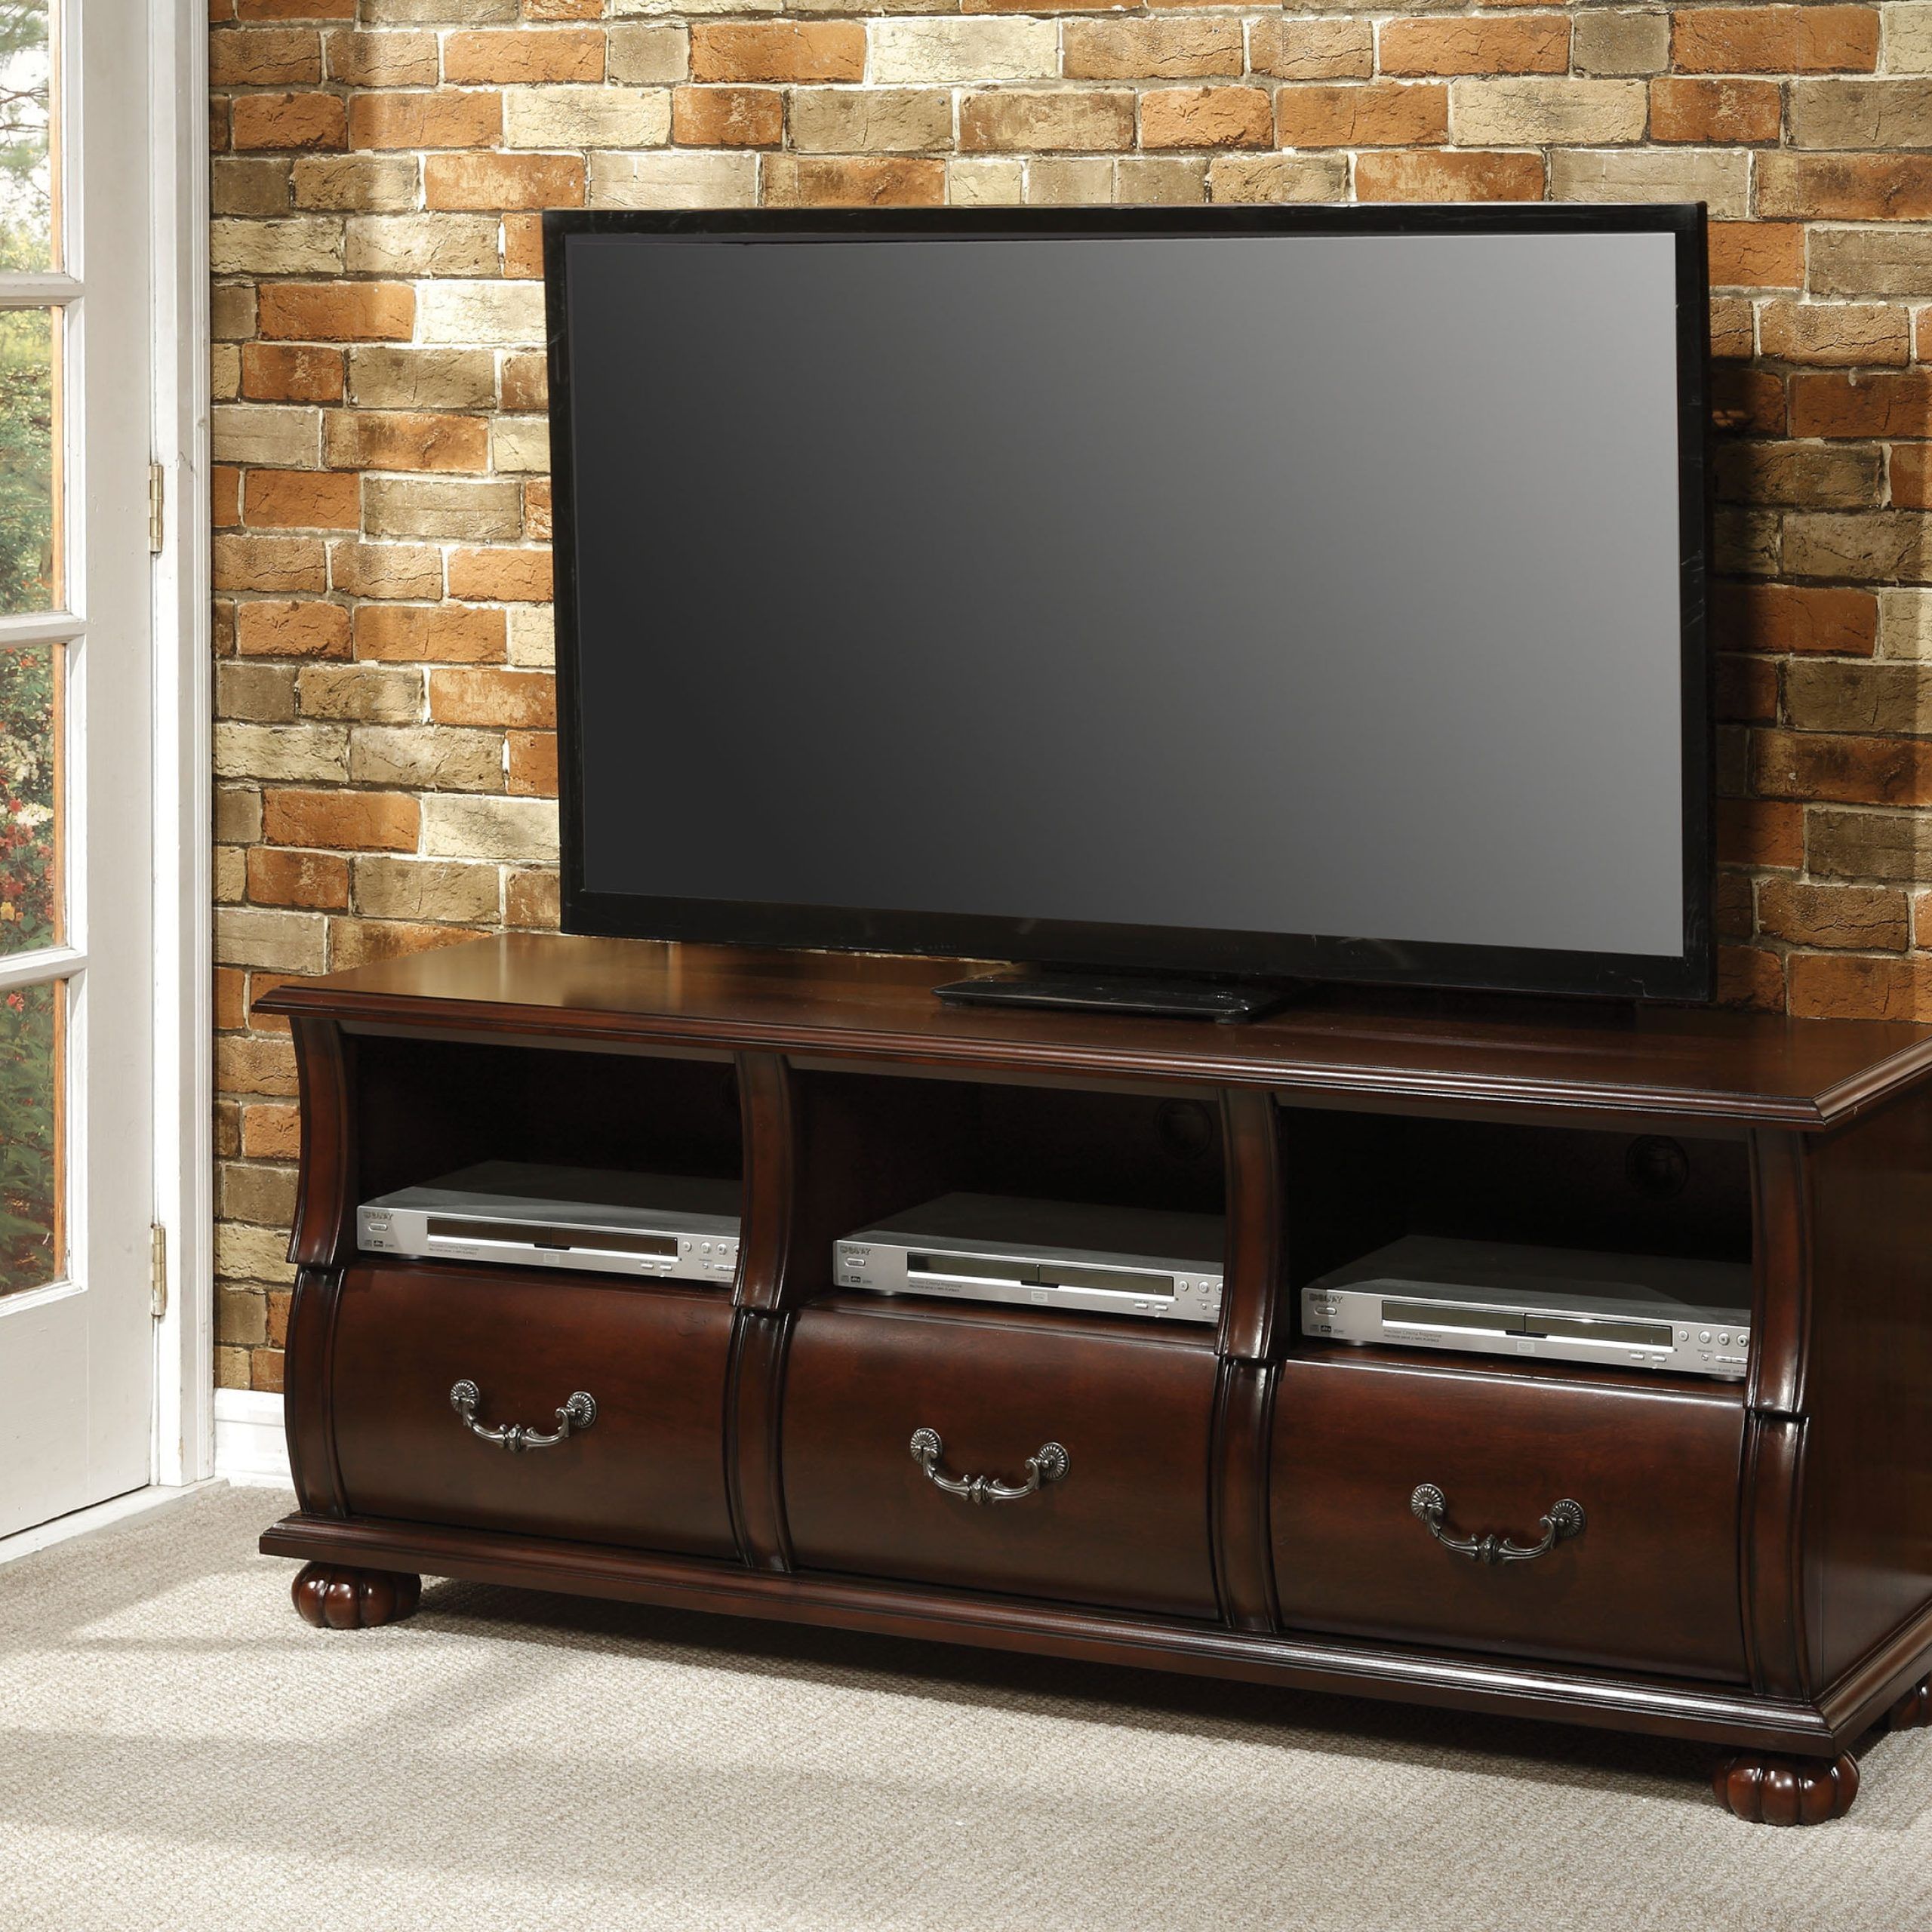 Acme Faysnow Dark Cherry Tv Stand For Flat Screen Tvs Up To 55 Within Stand For Flat Screen (Gallery 6 of 20)